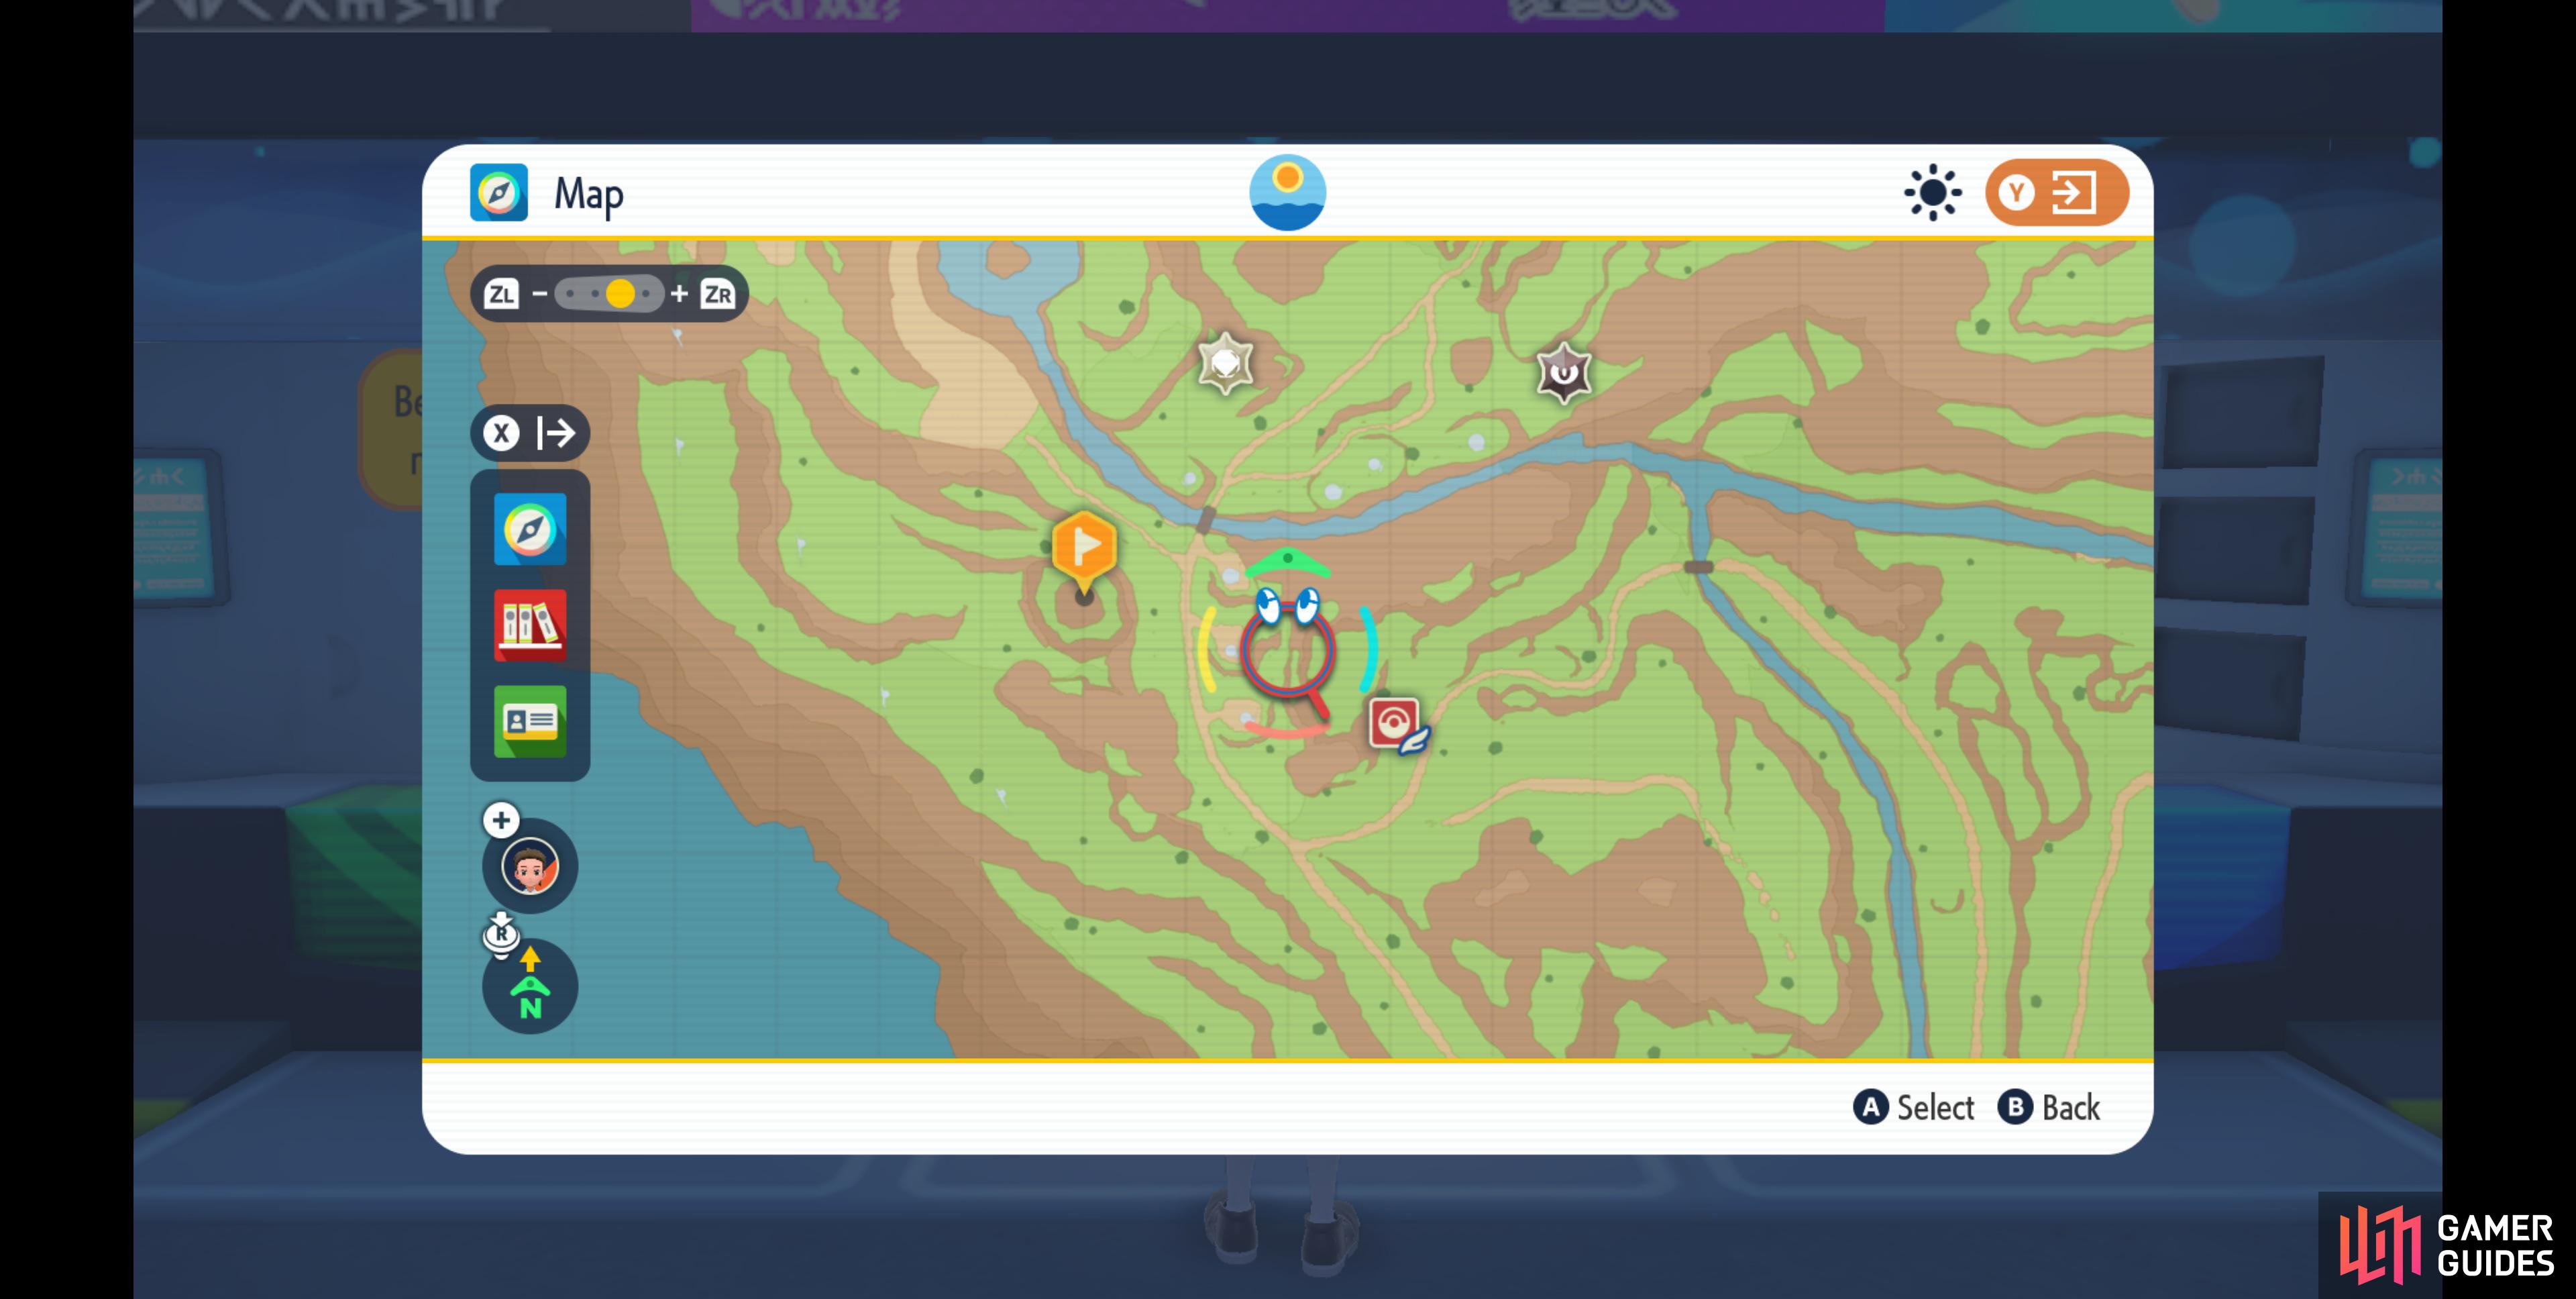 The next flag icon points to a crater northwest of the pokemon center